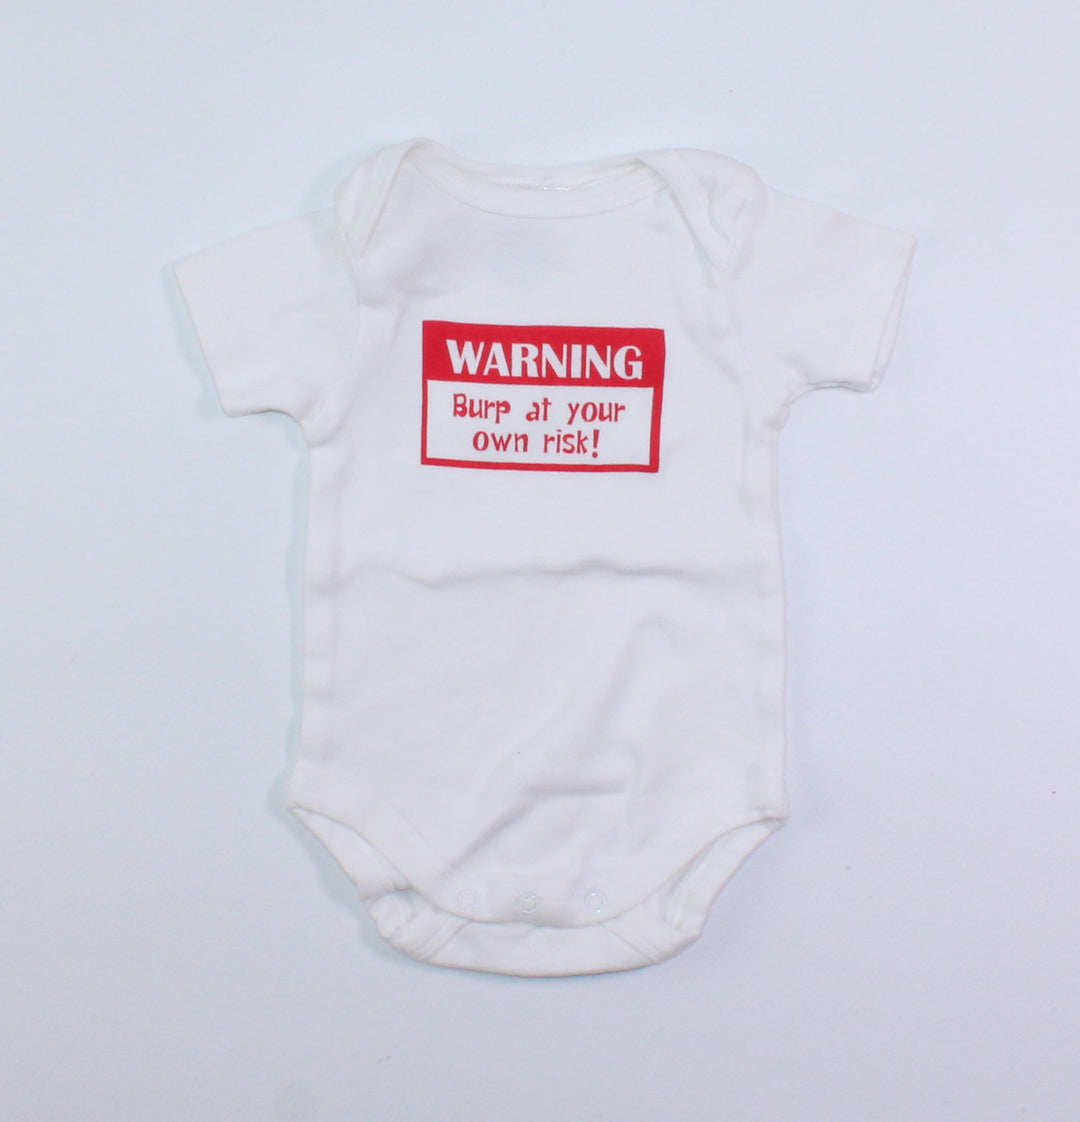 WARNING BURP AT YOUR OWN RISK ONESIE 3-6M EUC